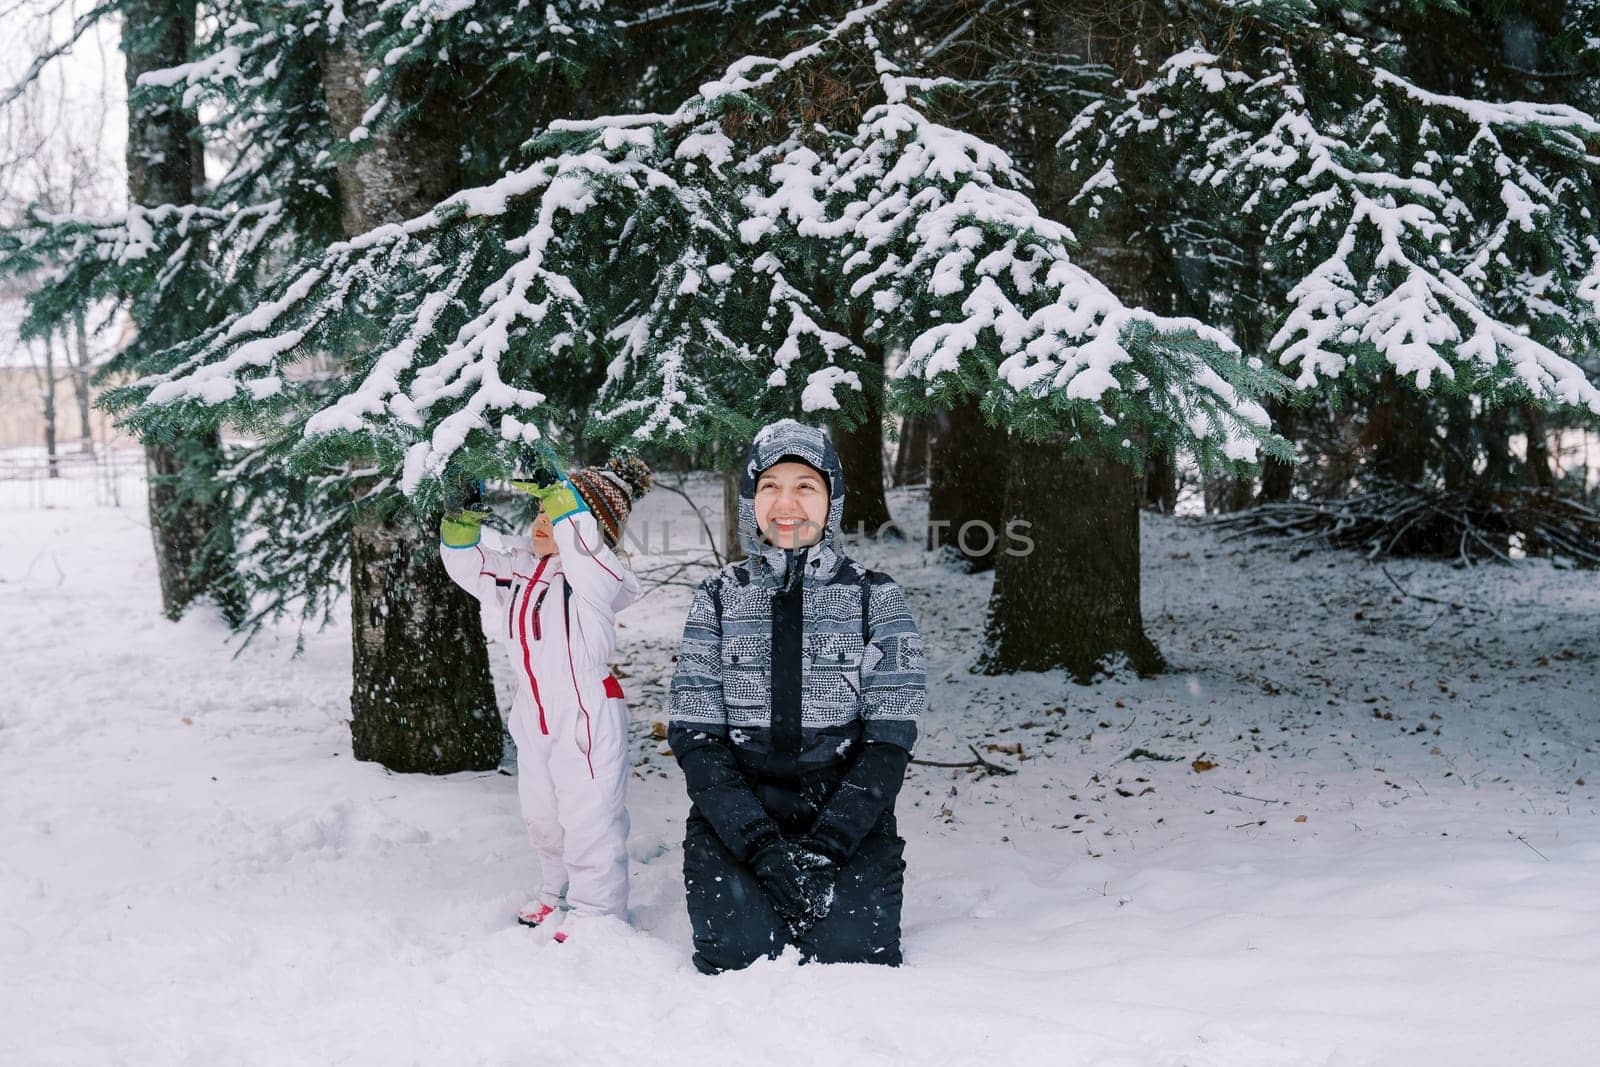 Smiling mother in a ski suit sits on her knees in the snow near a small child standing near a snow-covered pine tree by Nadtochiy